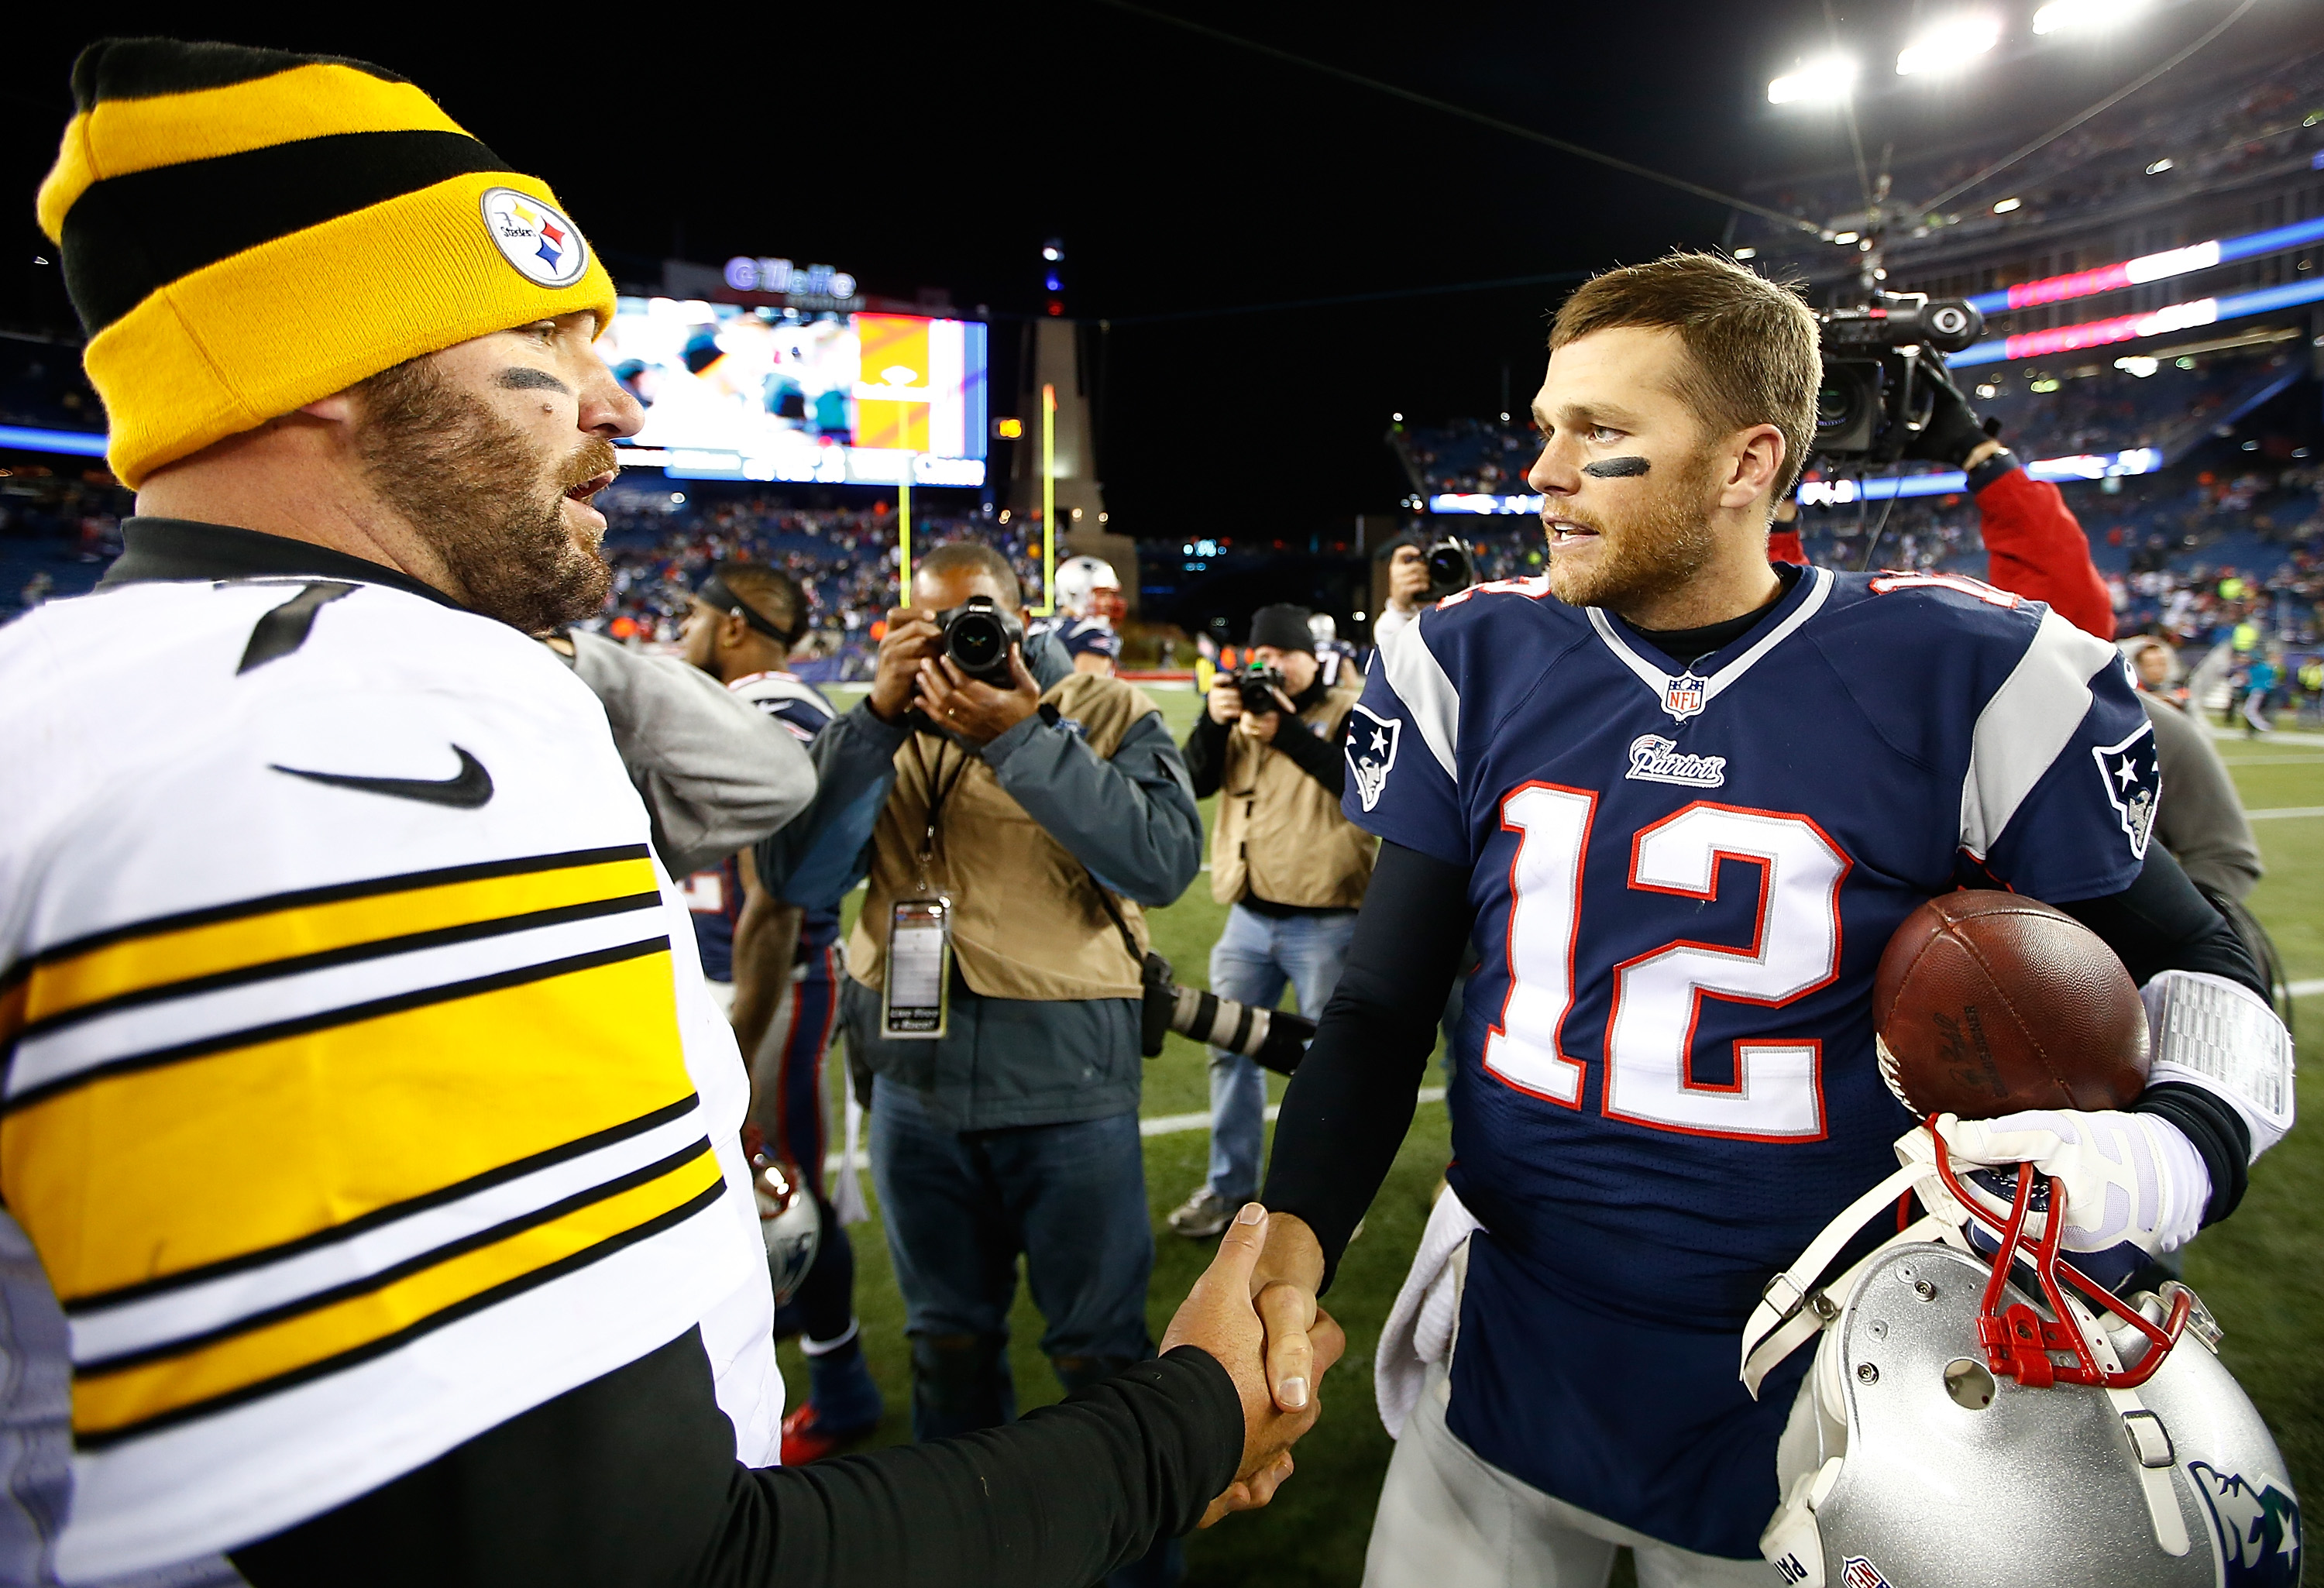 Ben Roethlisberger and the Pittsburgh Steelers will face the New England Patriots to open the NFL season on September 10, 2015, but Tom Brady might not be there. (Getty)